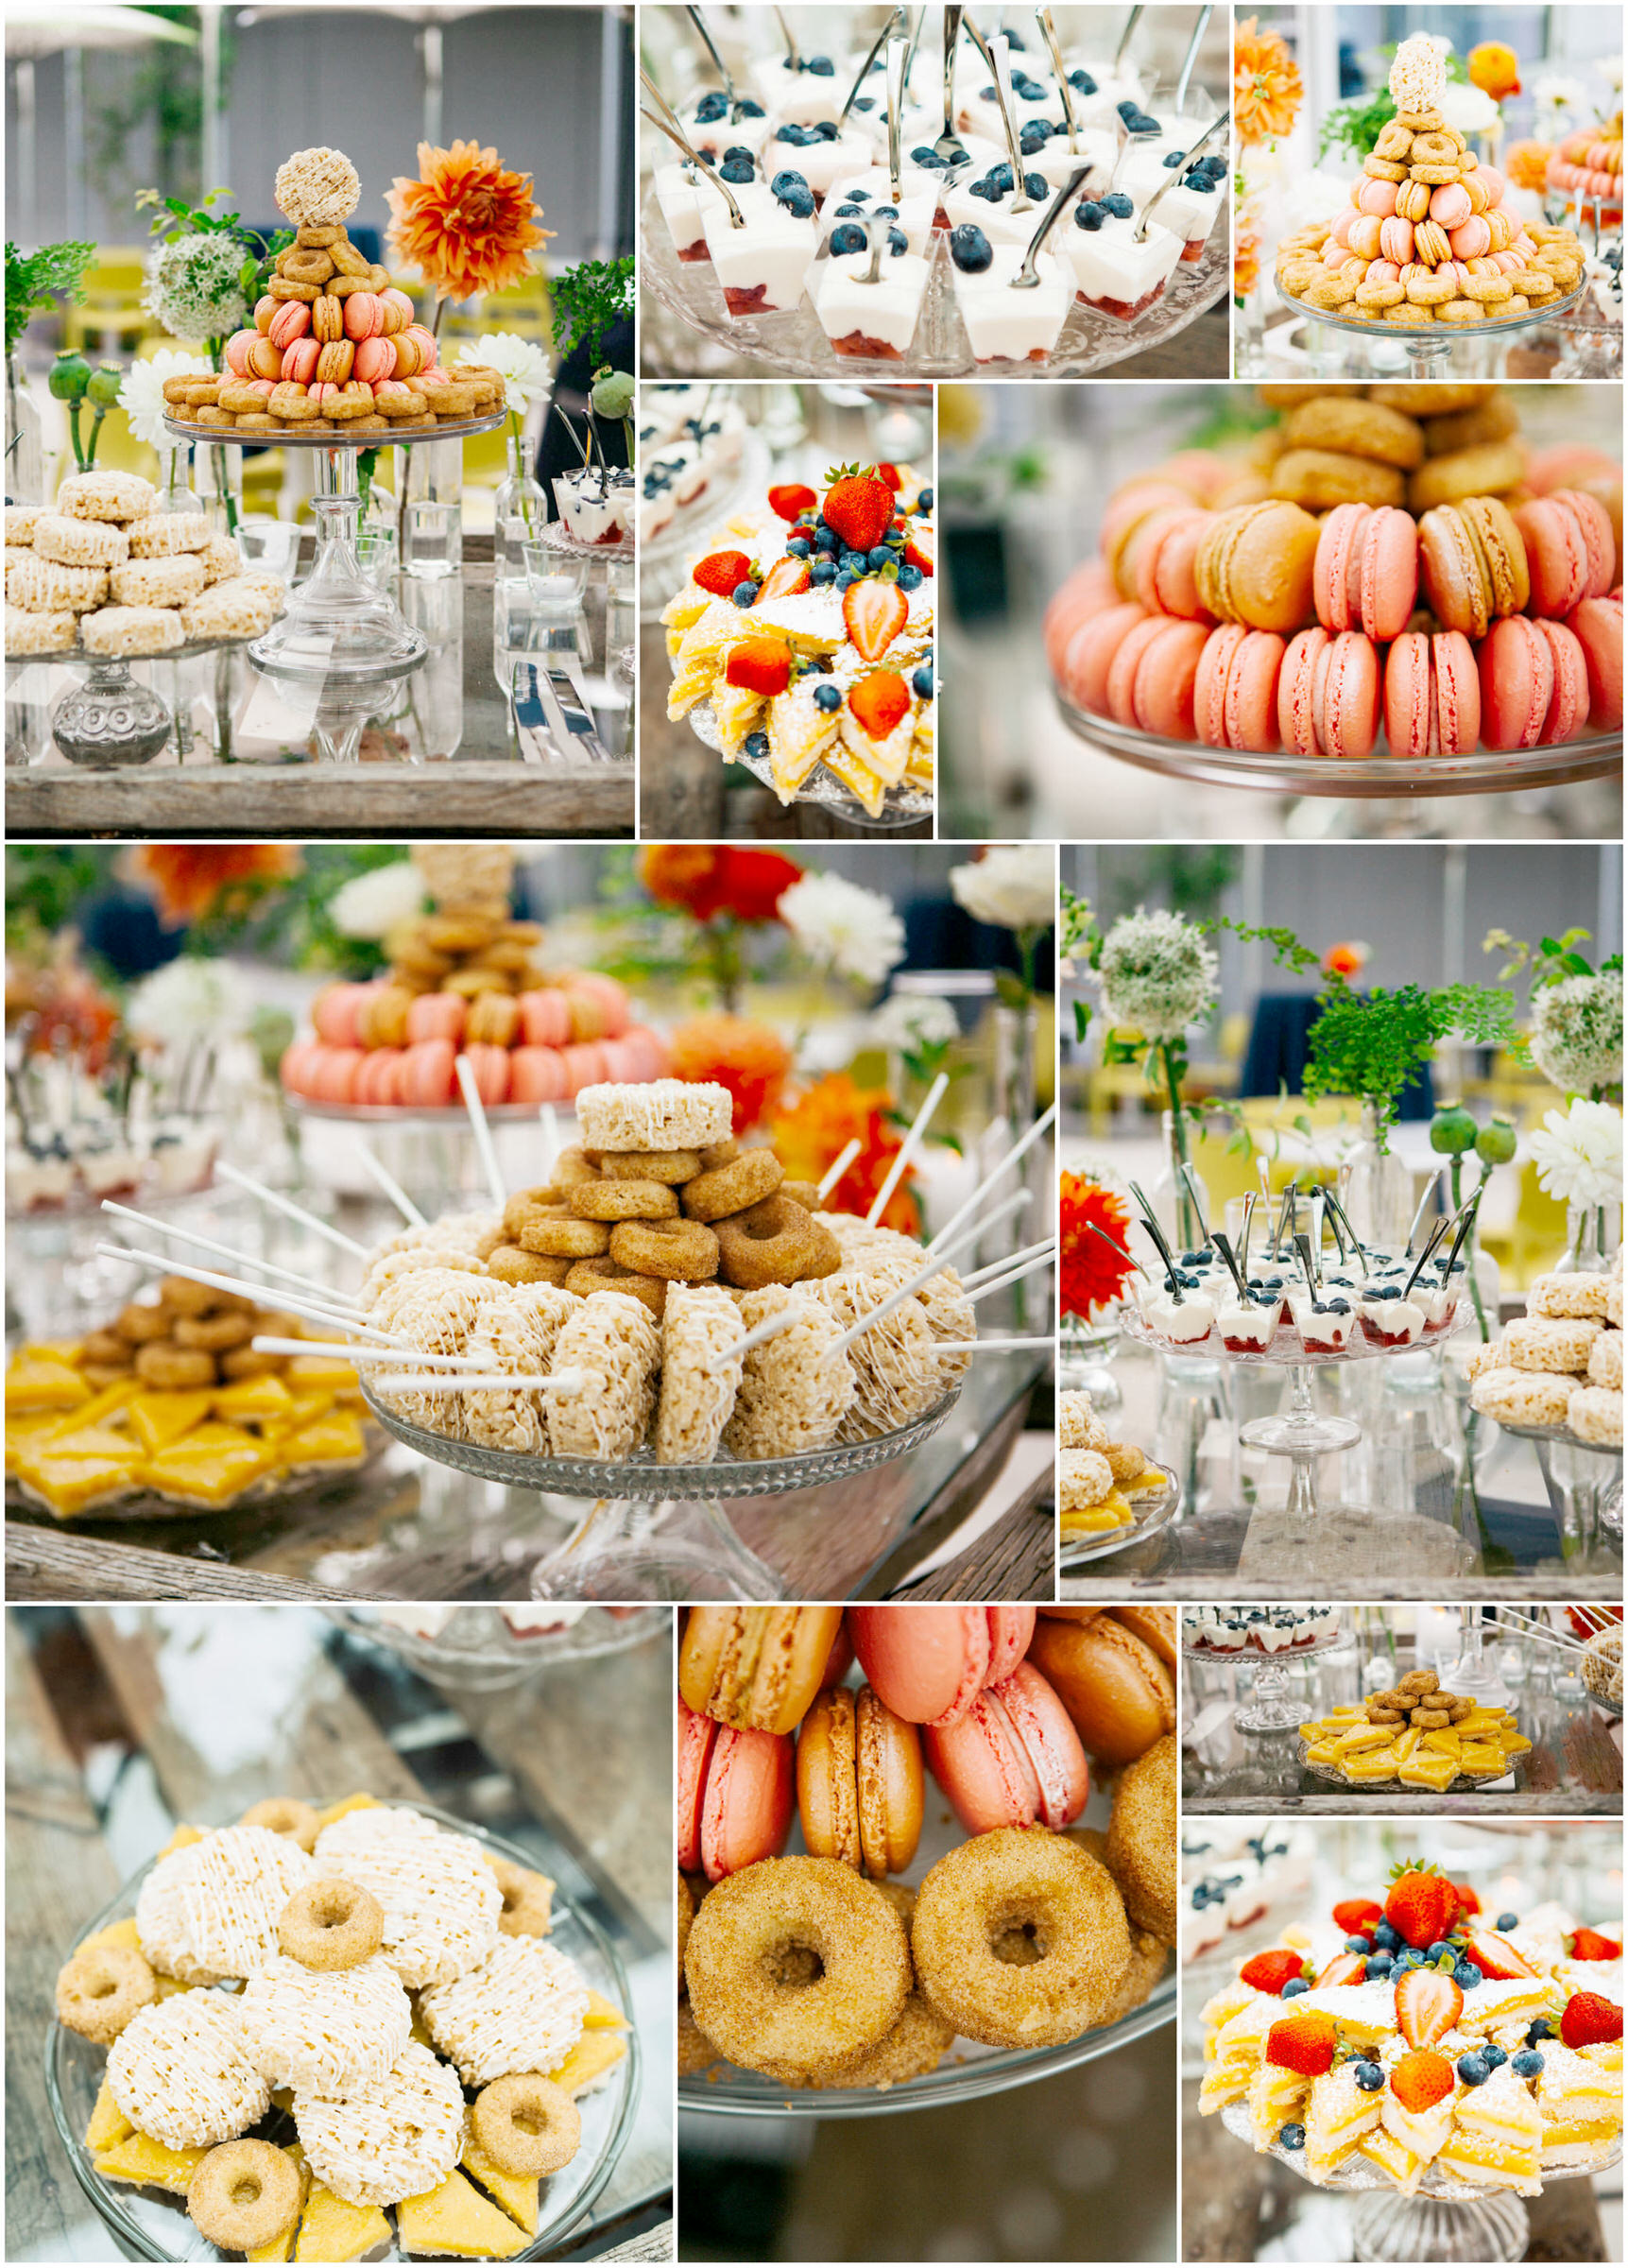 The beautiful dessert spread at Amy and Jeremy's wedding at Chihuly Garden and Glass